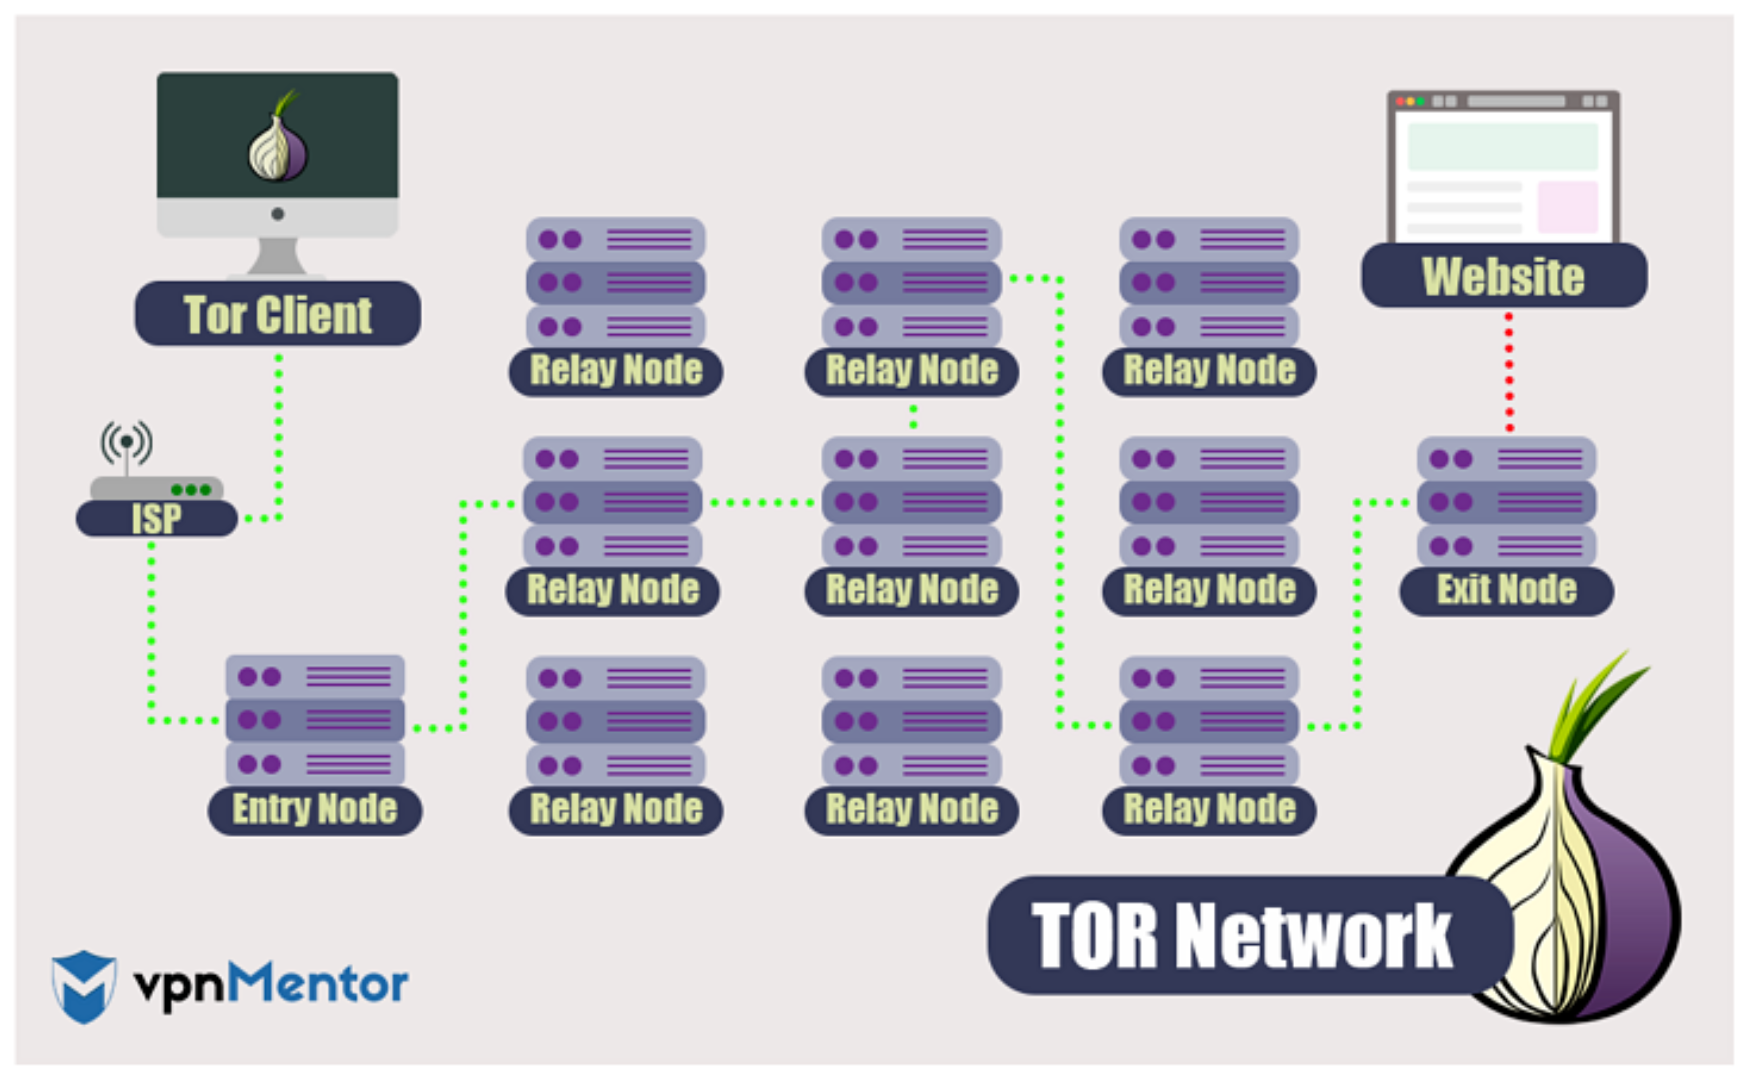 Image showing how your data travels through the Tor Browser network